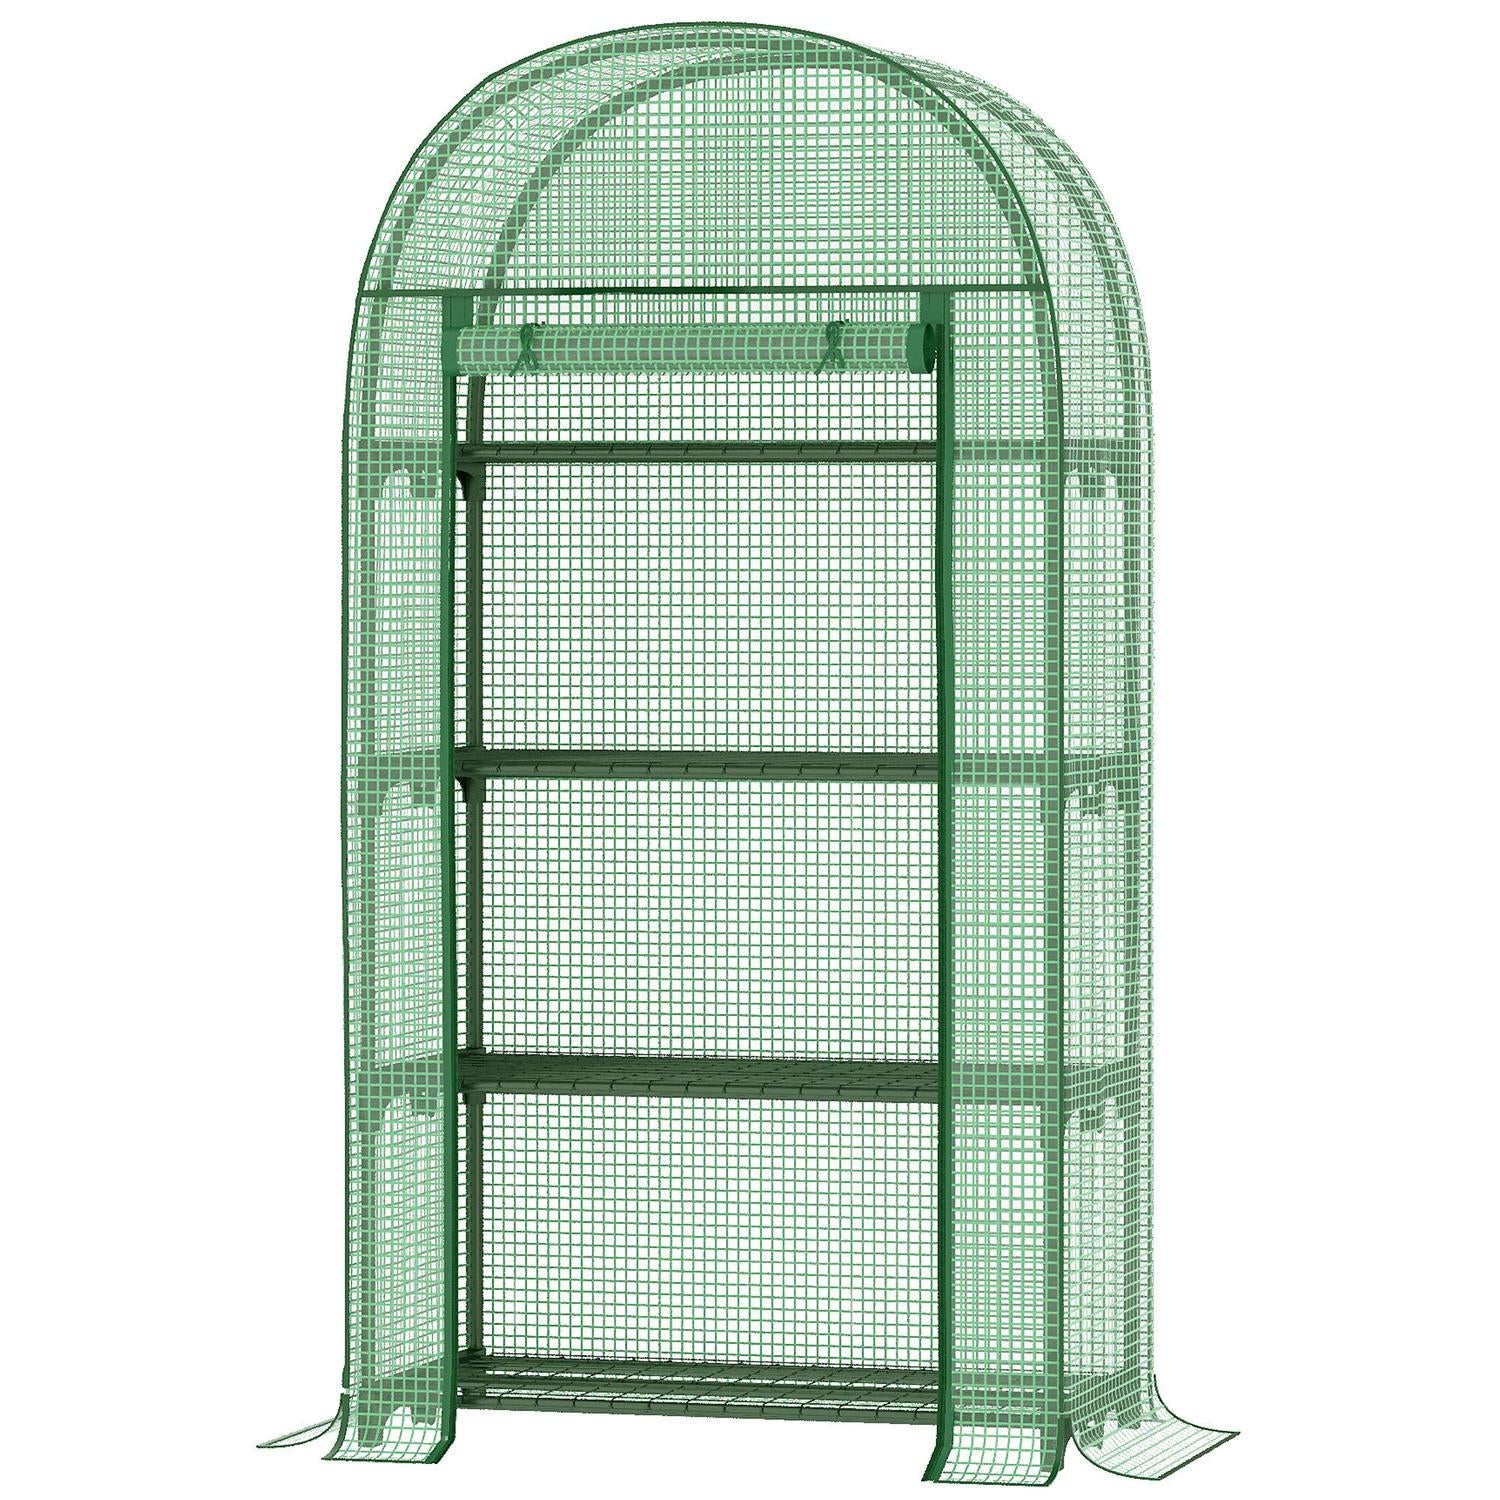 Mini Greenhouse For Outdoor, Portable Gardening Plant With Storage Shelf, Roll-Up Zippered Metal Frame And Cover, Green (80 X 49 X 160)cm